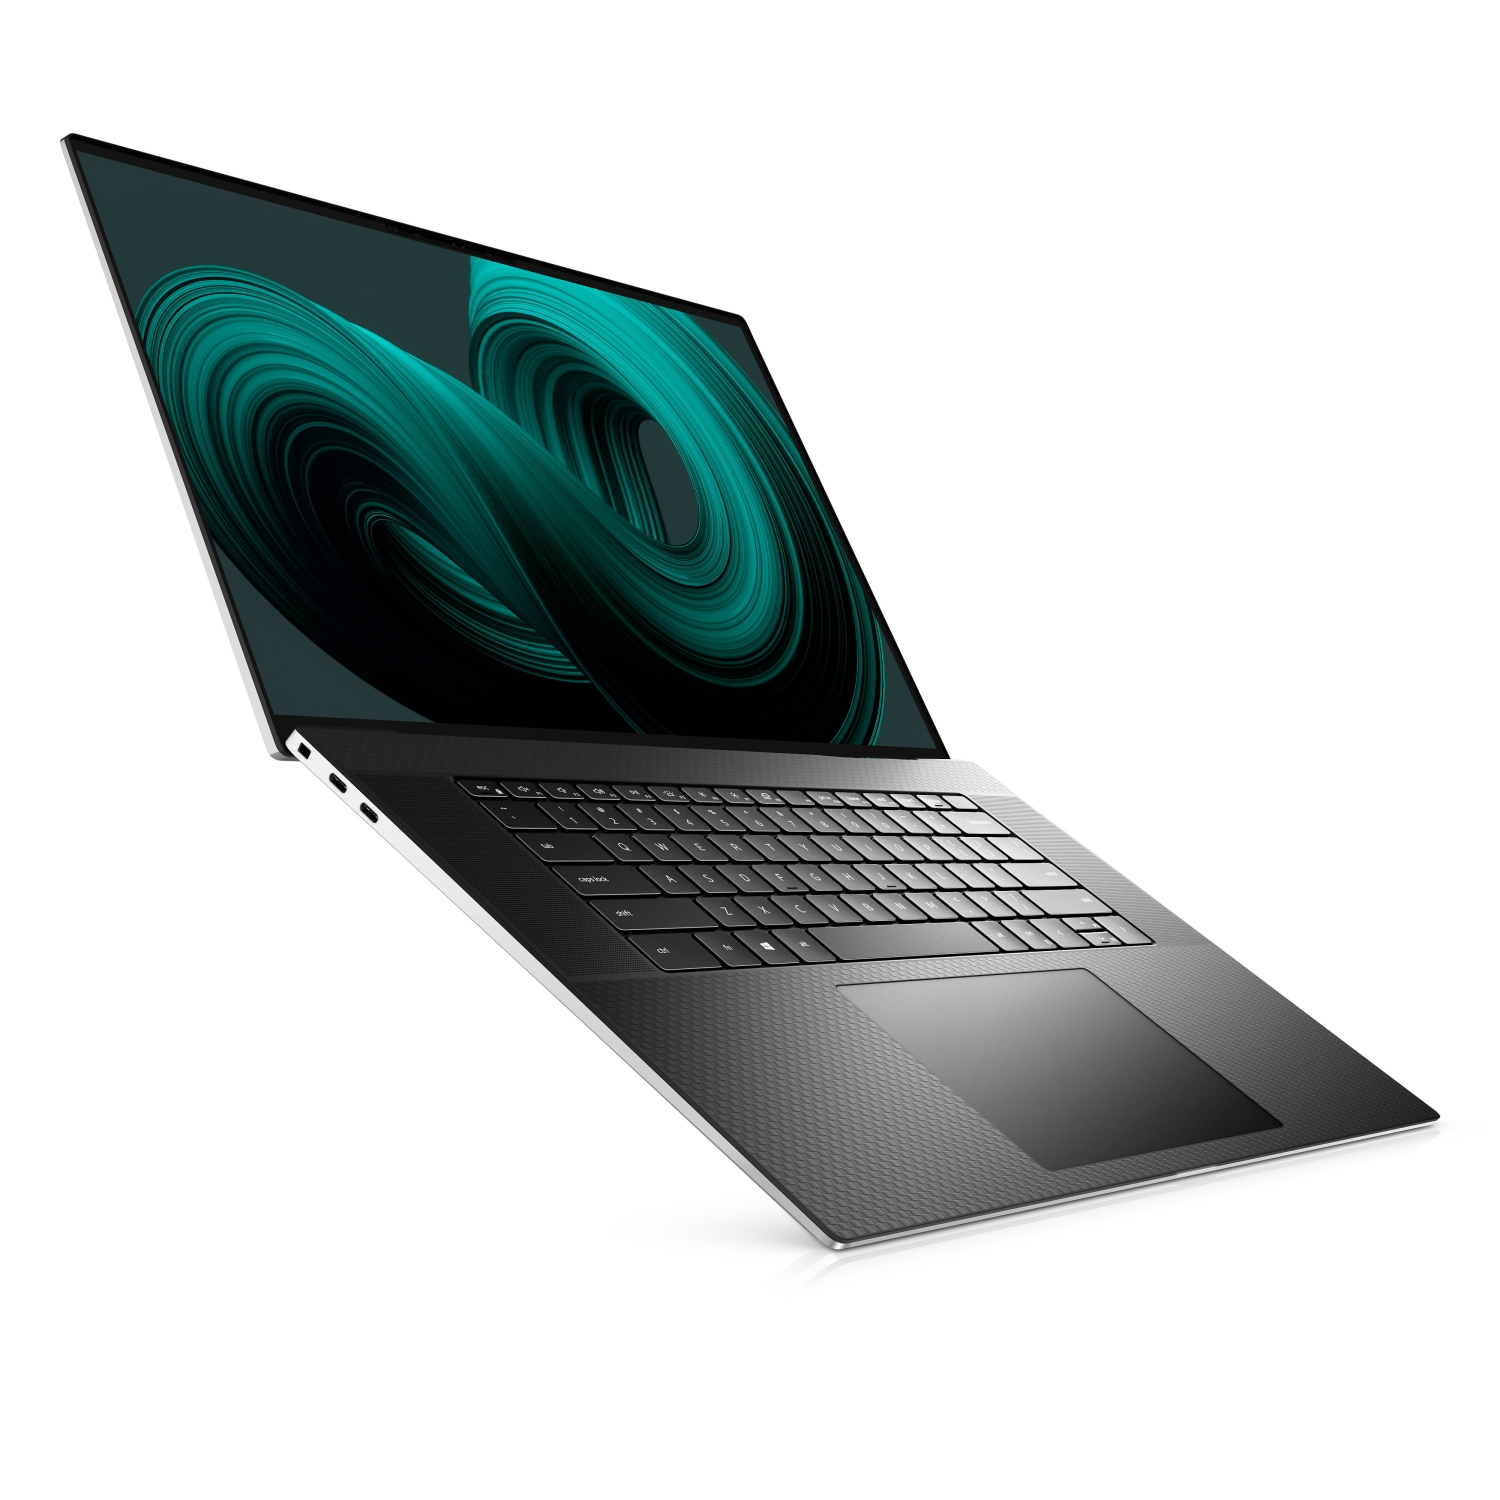 Refurbished (Excellent) – Dell XPS 9710 Laptop (2021) | 17" 4K Touch | Core i7 - 2TB SSD - 32GB RAM - RTX 3050 | Cores - 11th Gen CPU